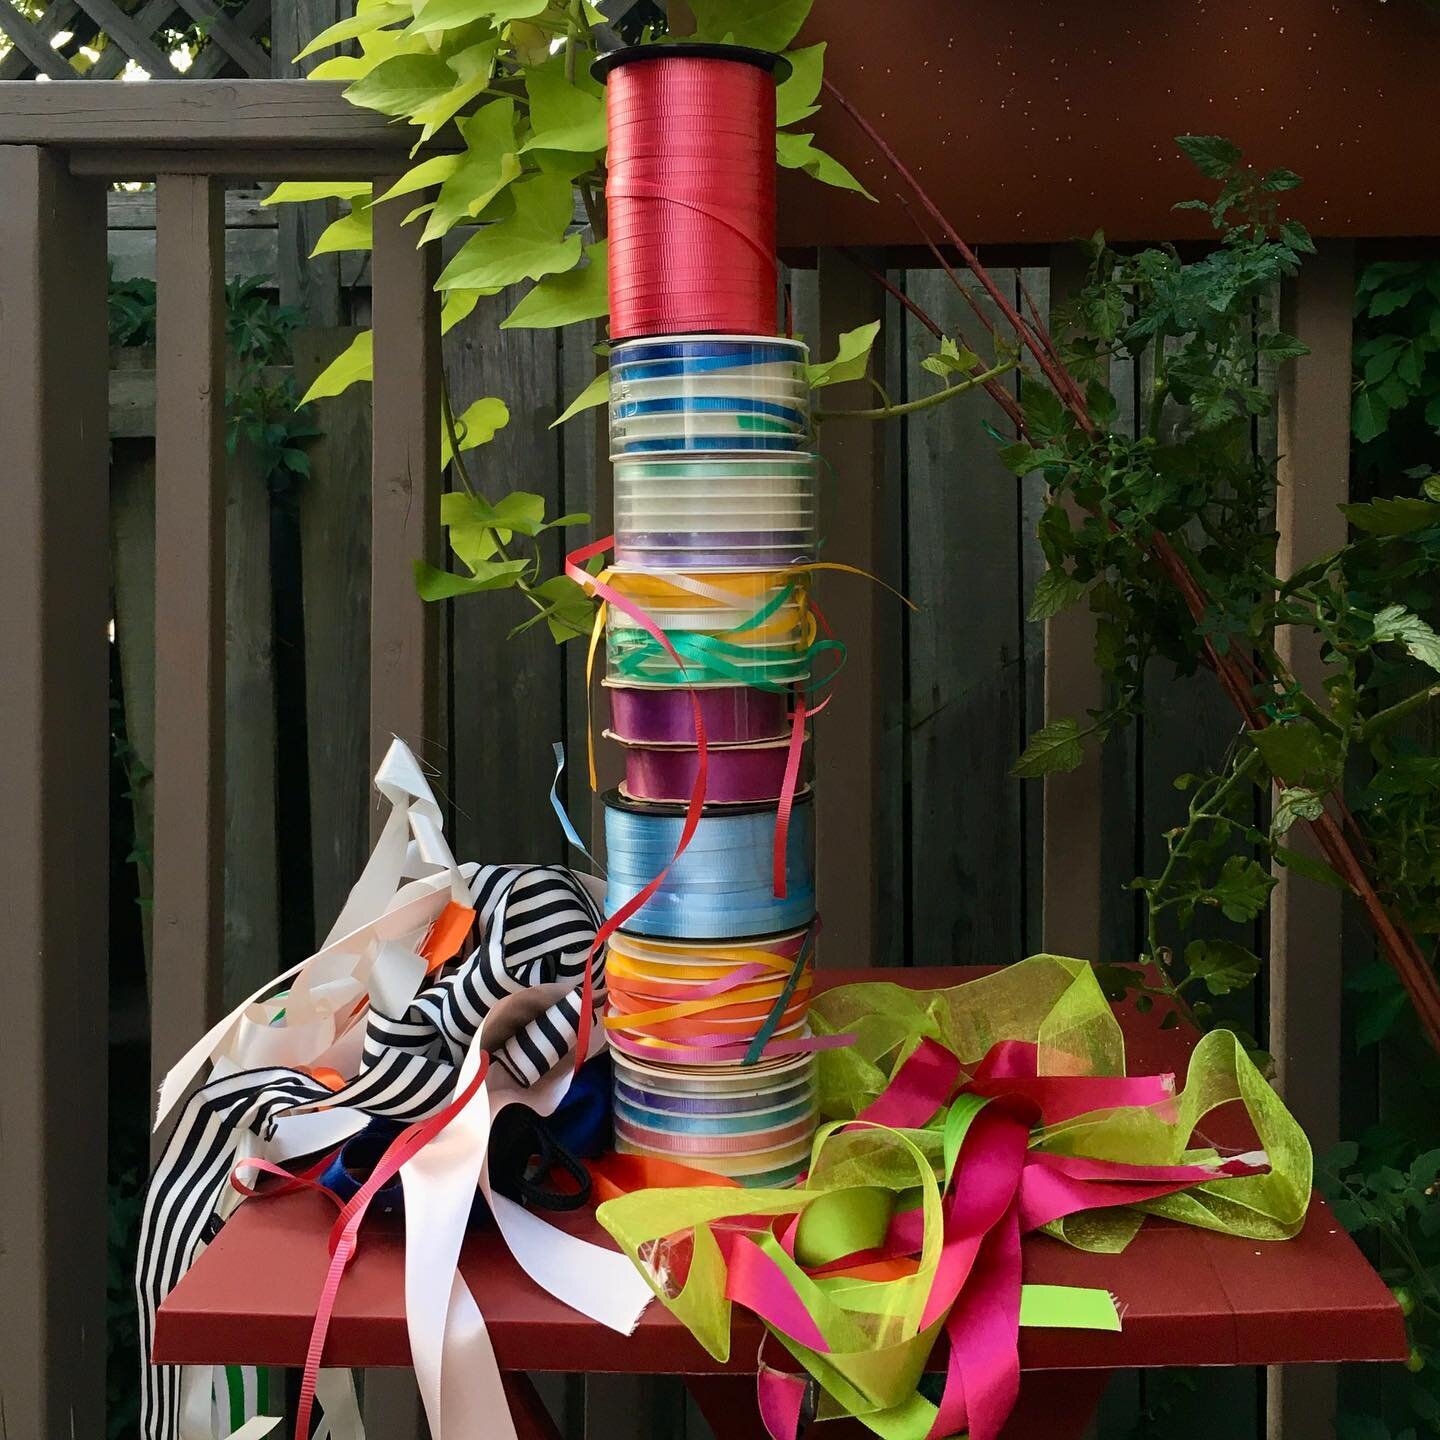 Wow, look at this feast of colour! - a recent donation of ribbons to the #netofconnection 
💝💚💝💜💝💙💝

#thankyou #thenetproject #donation #collaboration #connection #ribbons #colour #netmaking #summercolours #network #fibreart #recycledart #net